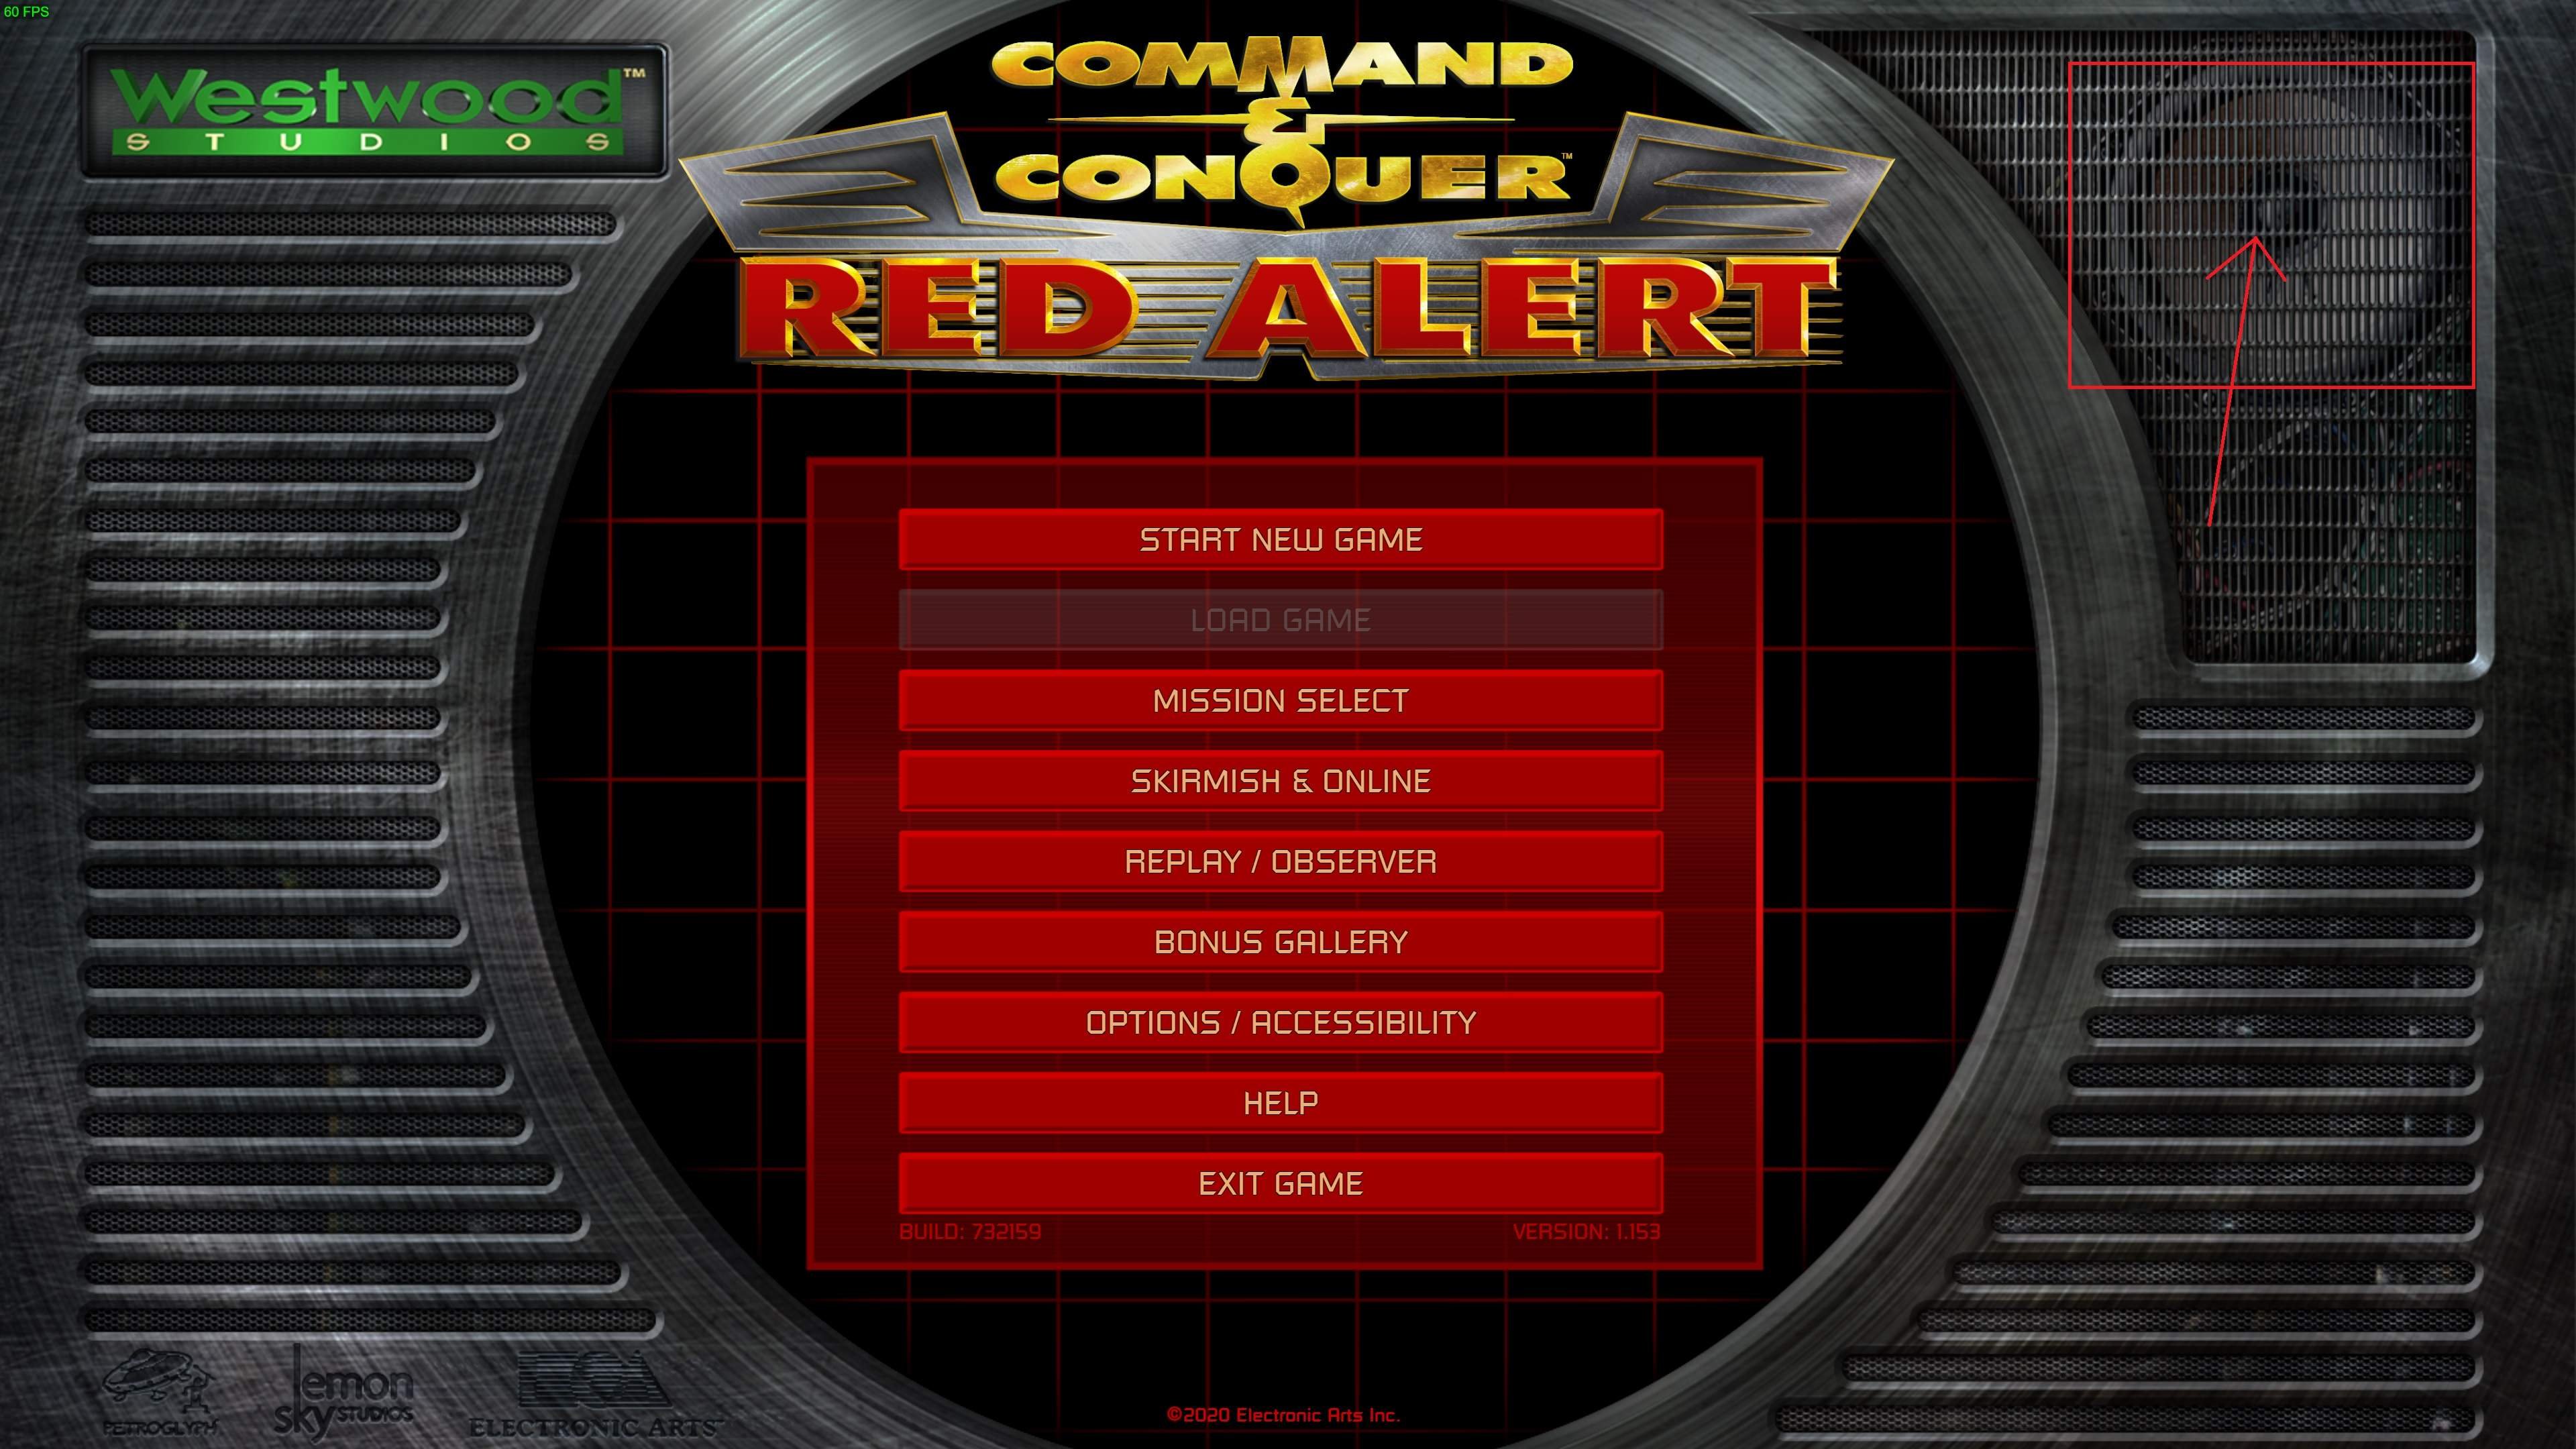 Command conquer читы. Command Conquer Red Alert 1 Remastered. Command & Conquer: Red Alert 2. Command Conquer Red Alert 2 Remastered. Command Conquer: Red Alert меню.